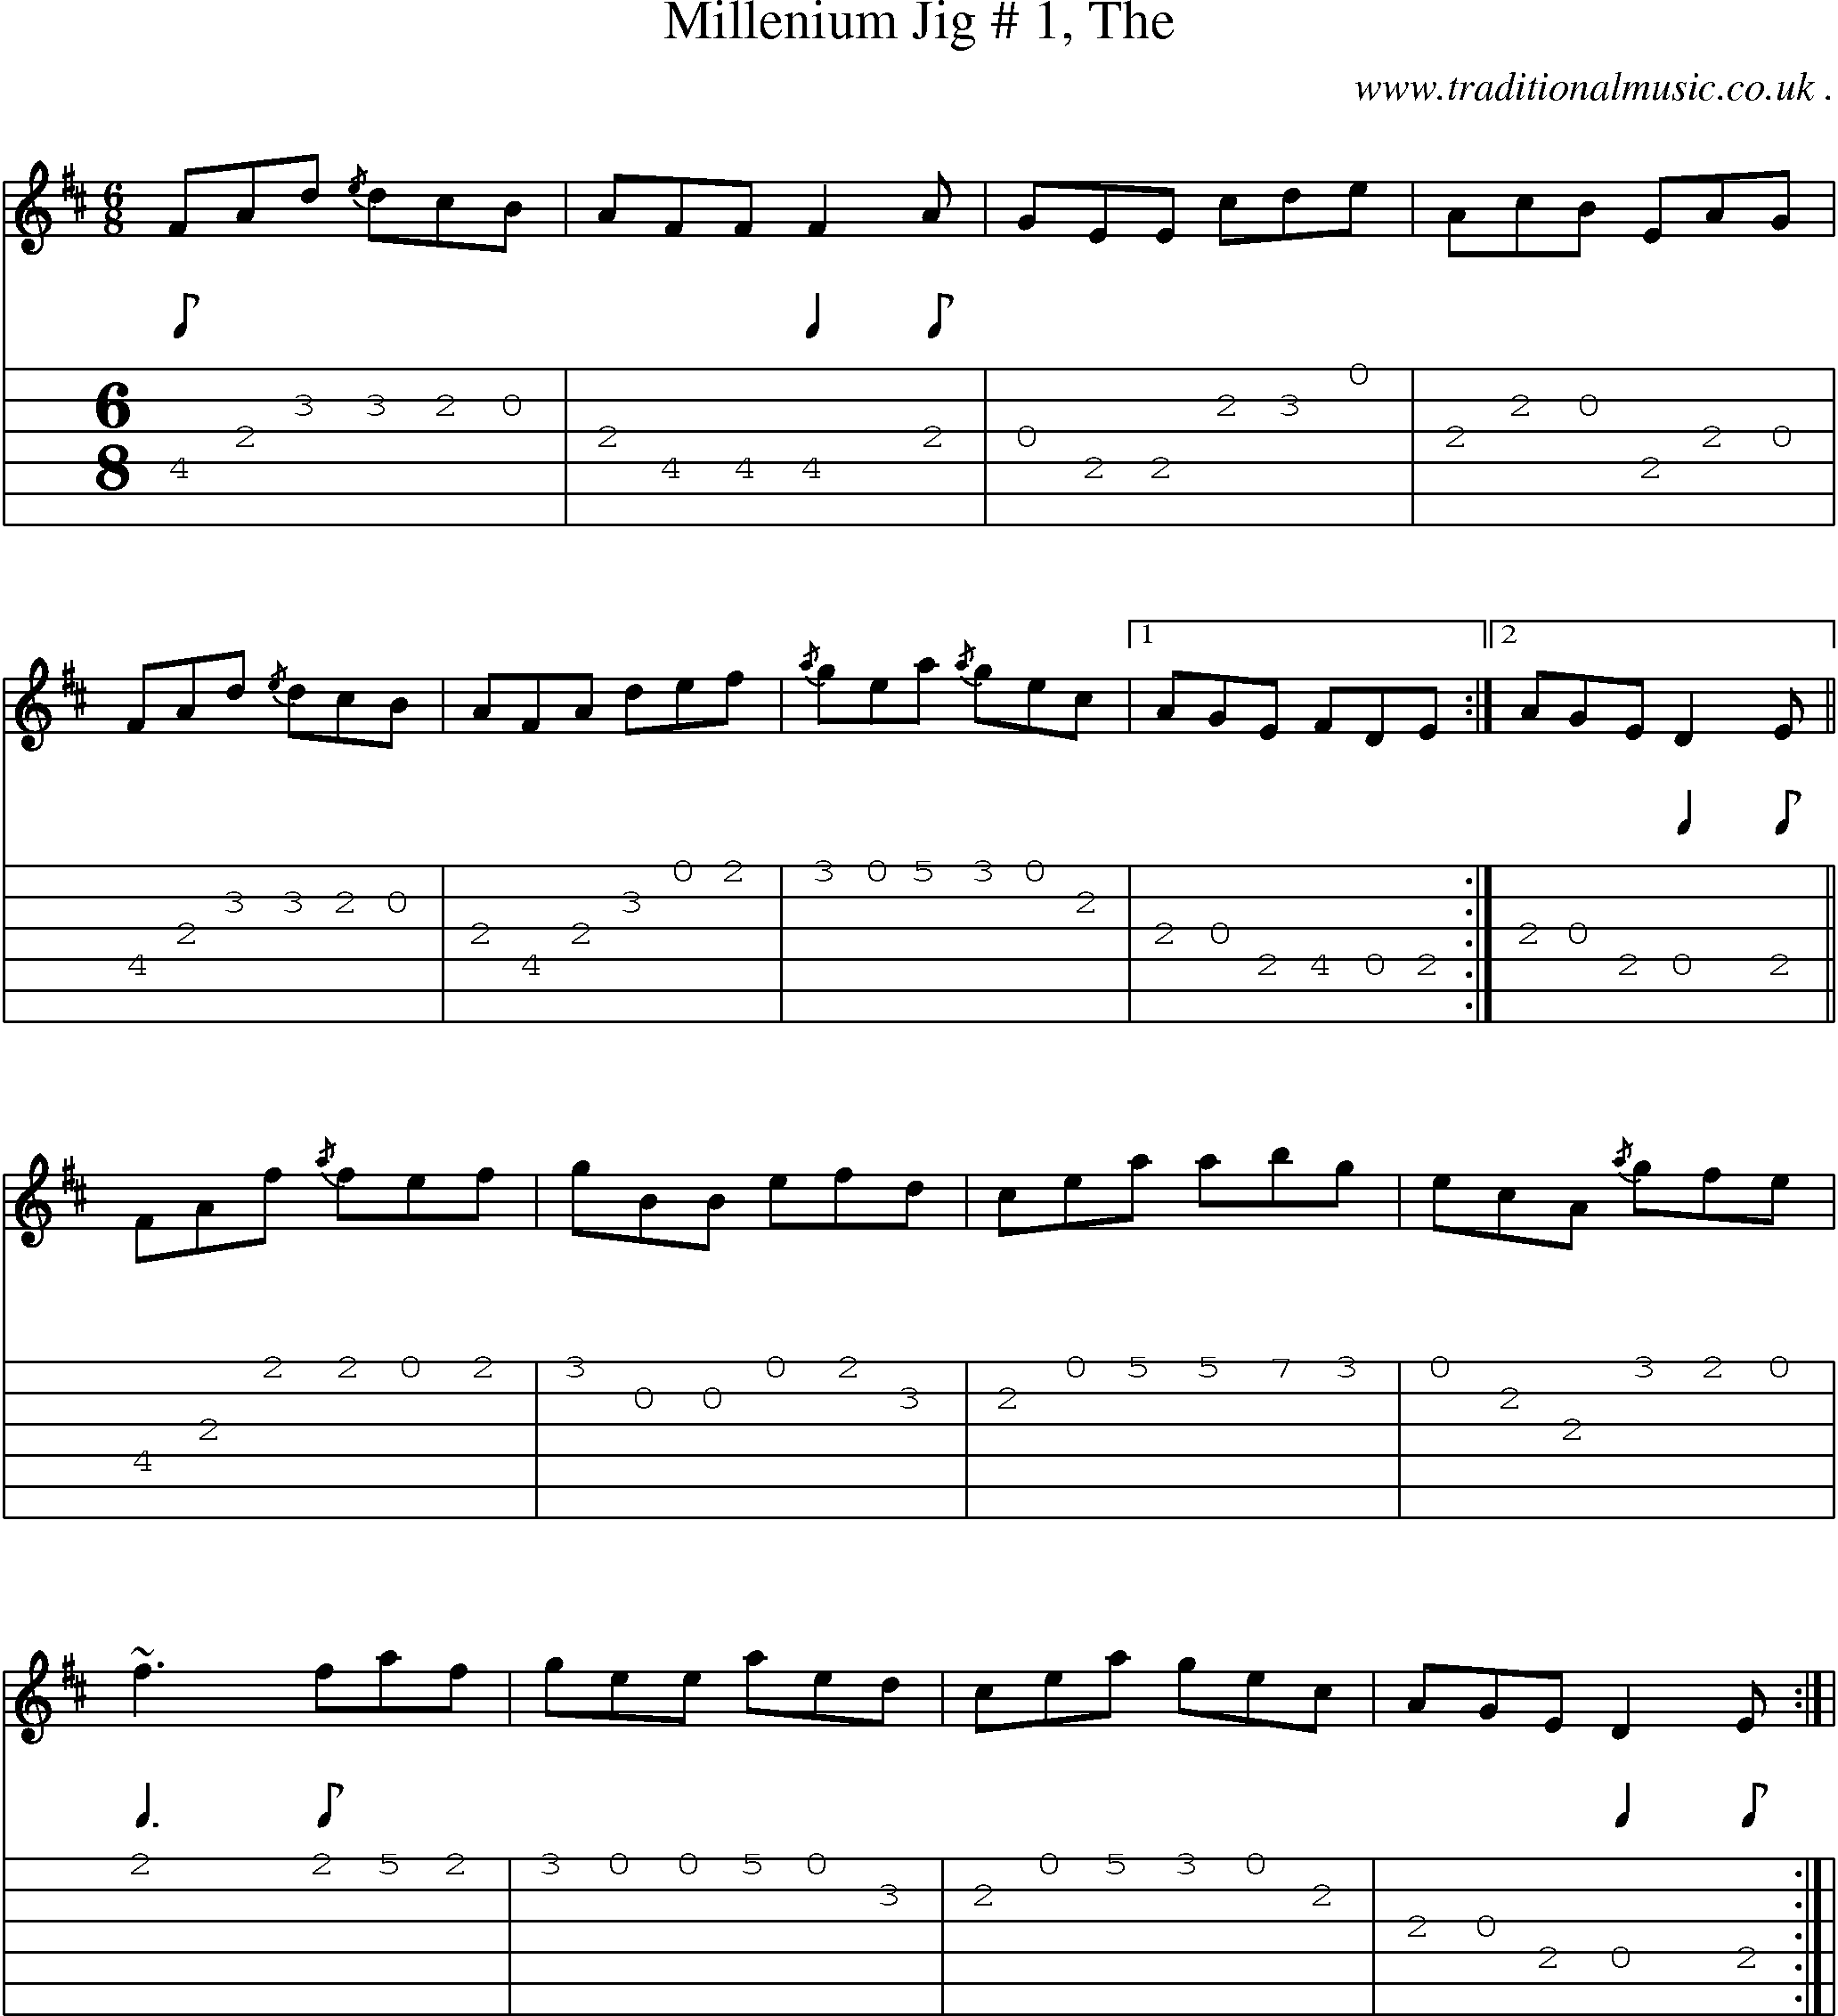 Sheet-music  score, Chords and Guitar Tabs for Millenium Jig  1 The